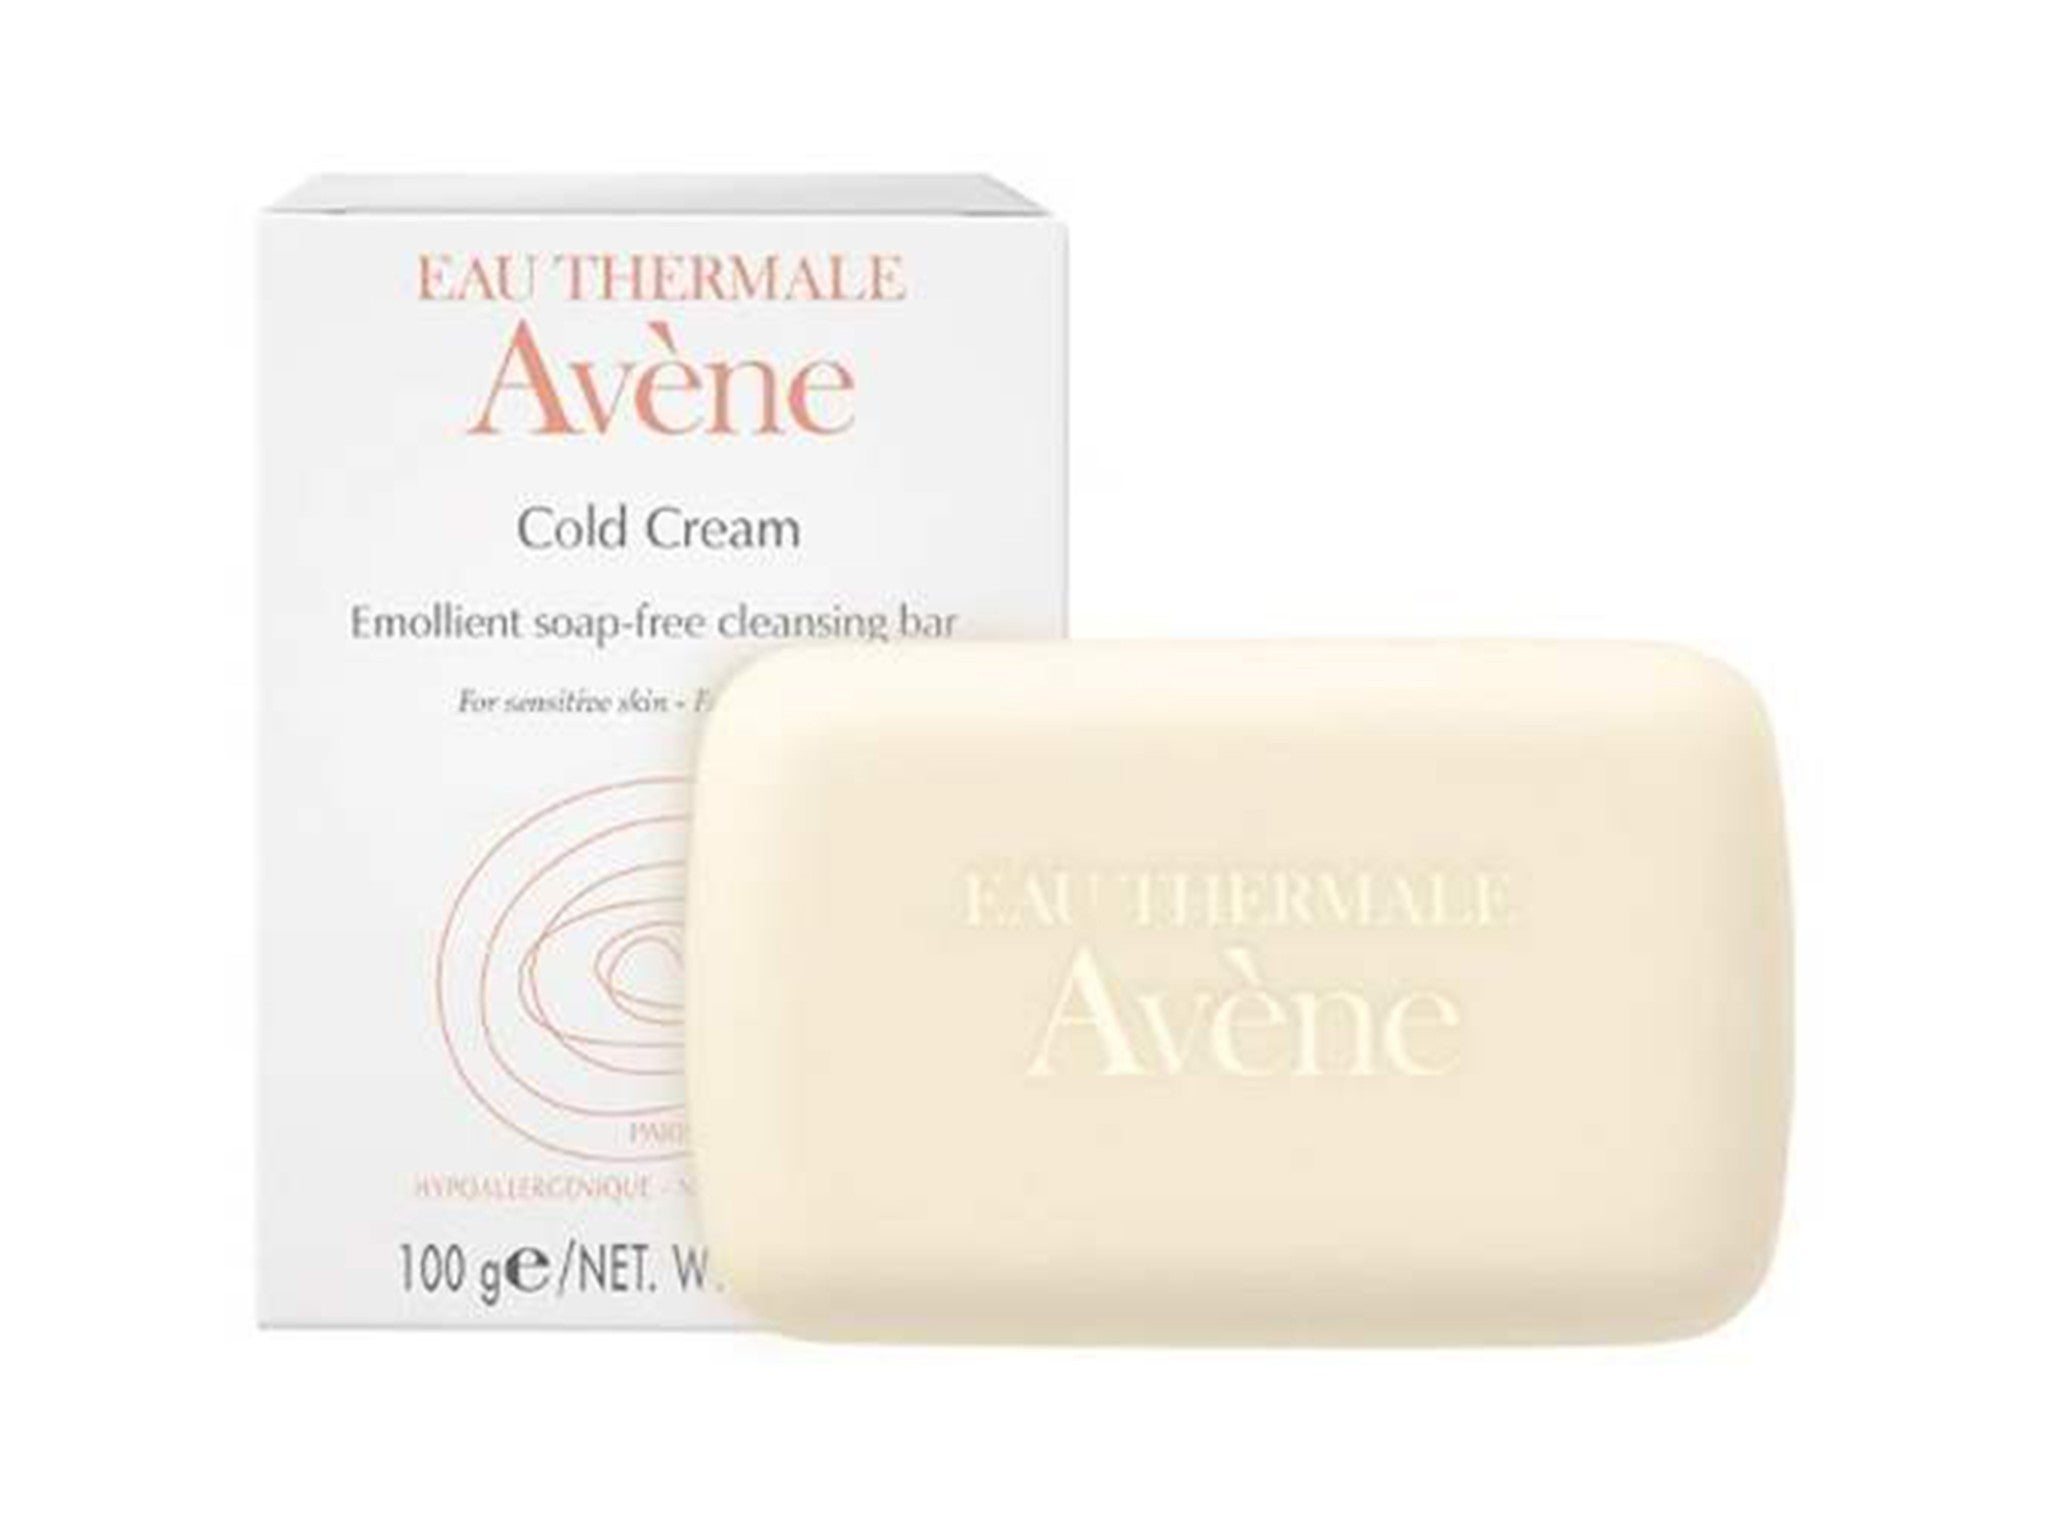 Eau Thermale Avène ultra-rich cleansing bar with cold cream  indybest.jpg